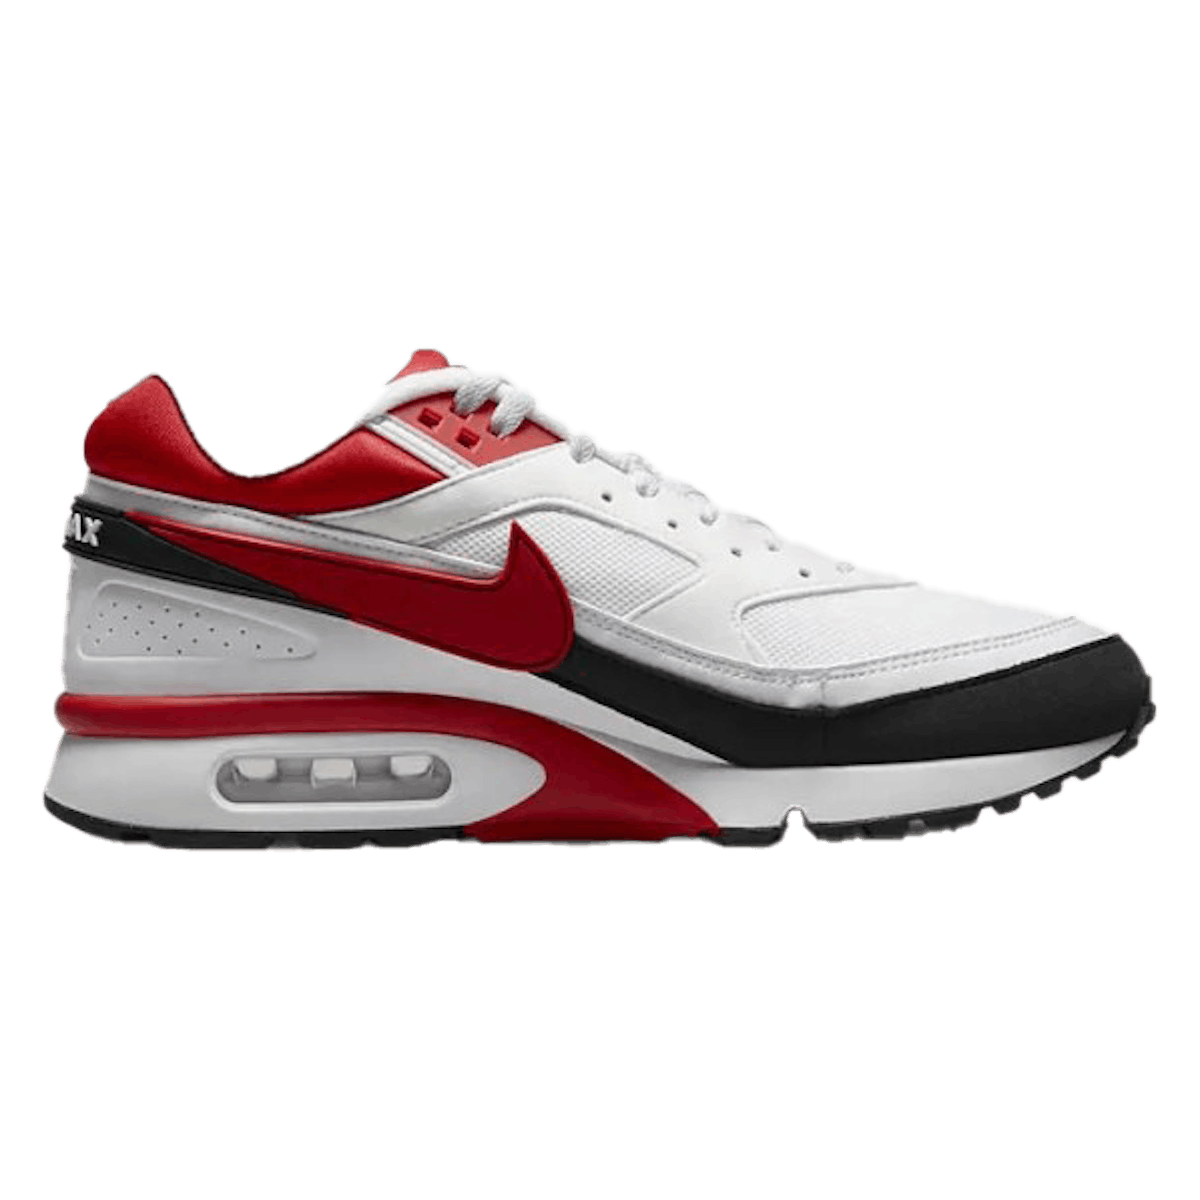 Nike Air Max BW "White and Sport Red"